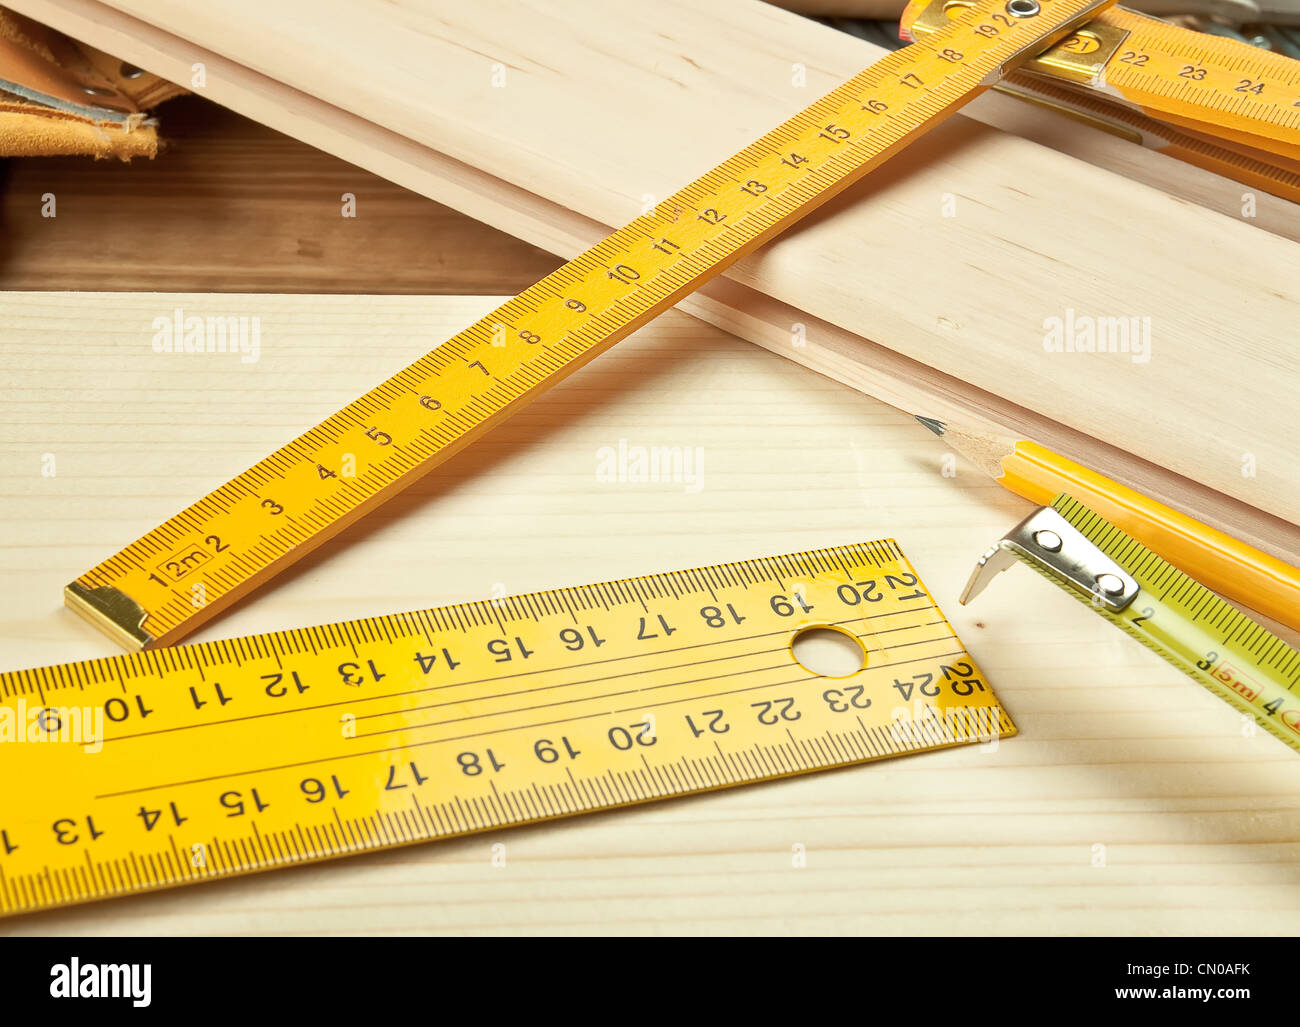 Rulers on a wooden background. Stock Photo